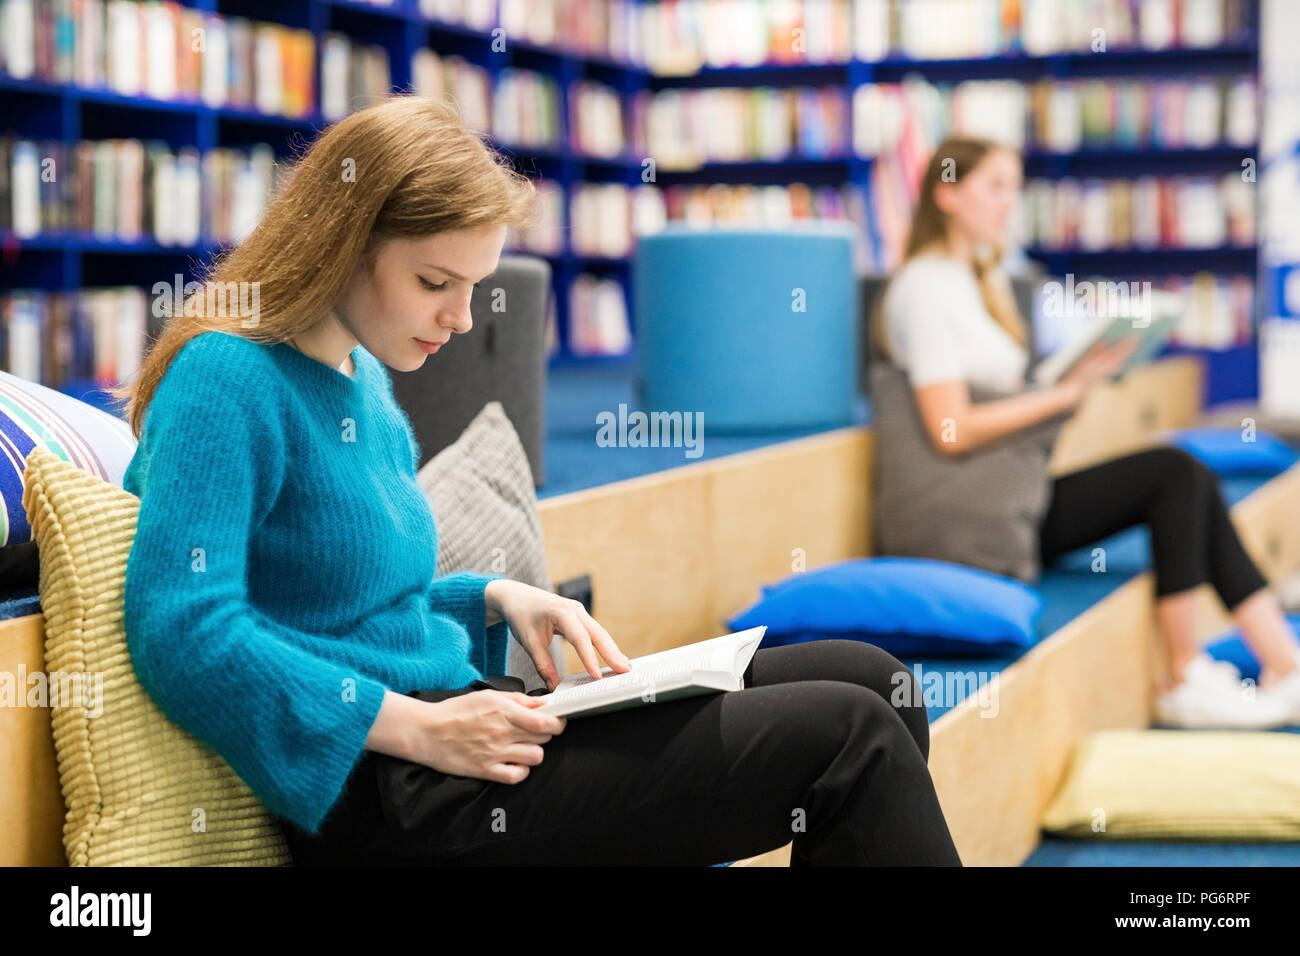 Teenage girls sitting in a public library reading book Stock Photo